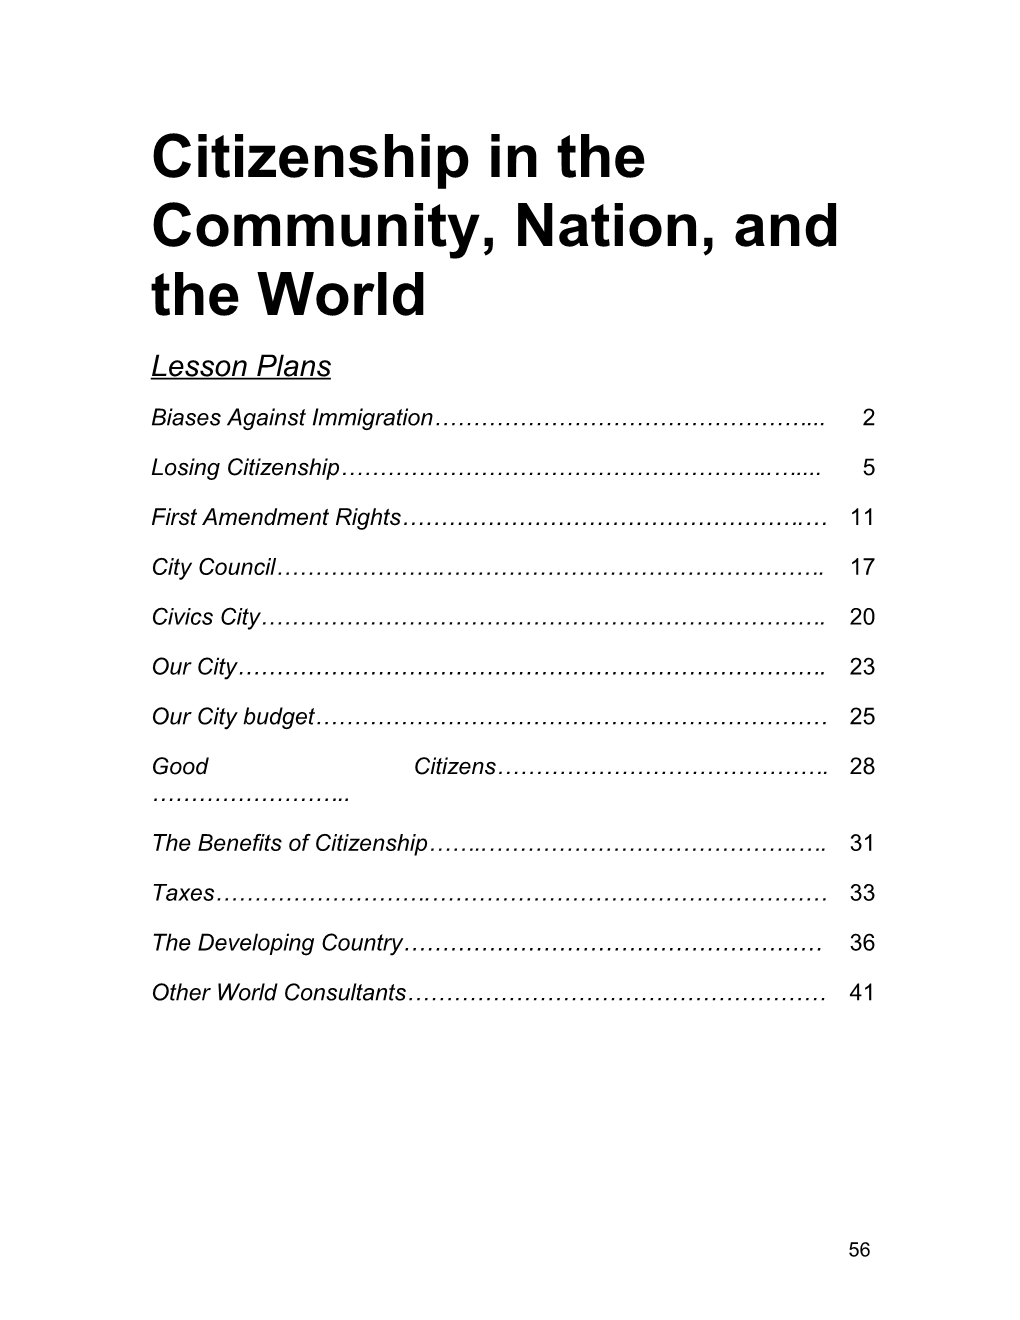 Citizenship in the Community, Nation, and the World